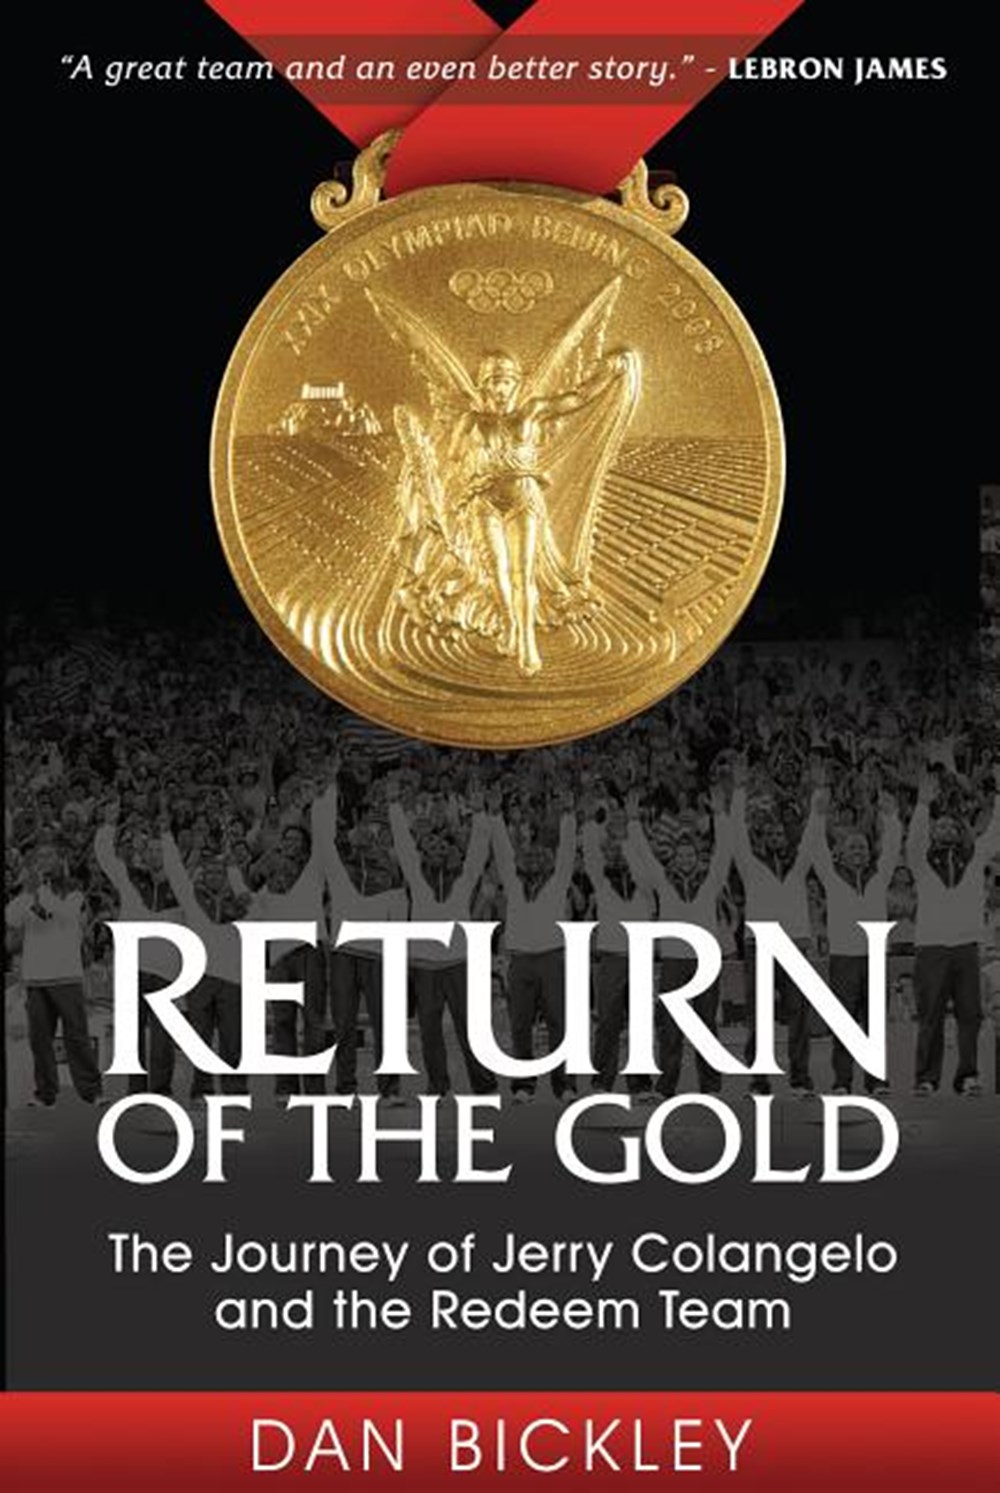 Return of the Gold The Journey of Jerry Colangelo and the Redeem Team